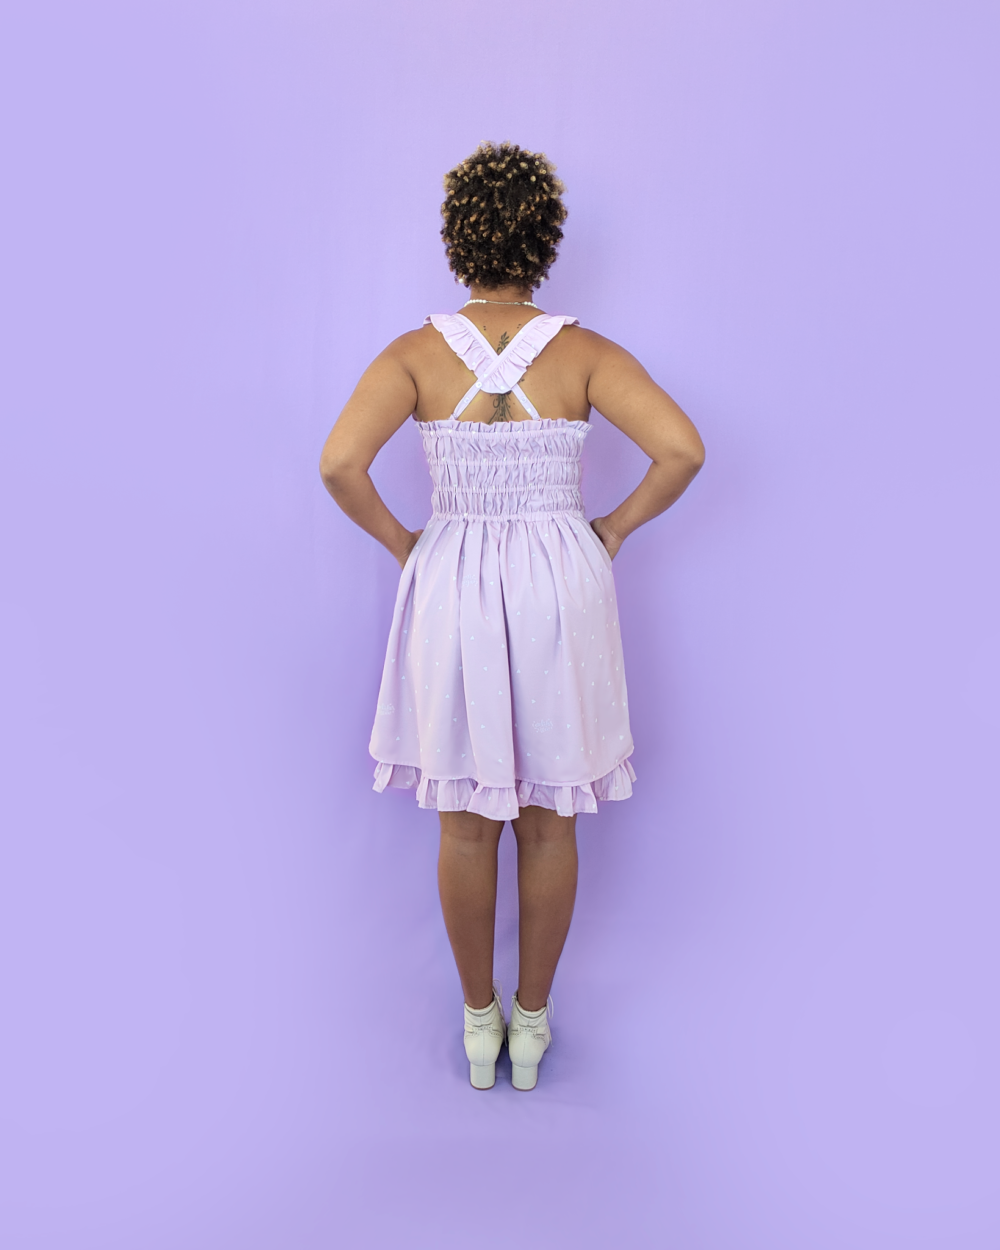 Model wearing a lavender dress with a heart print by melikestea